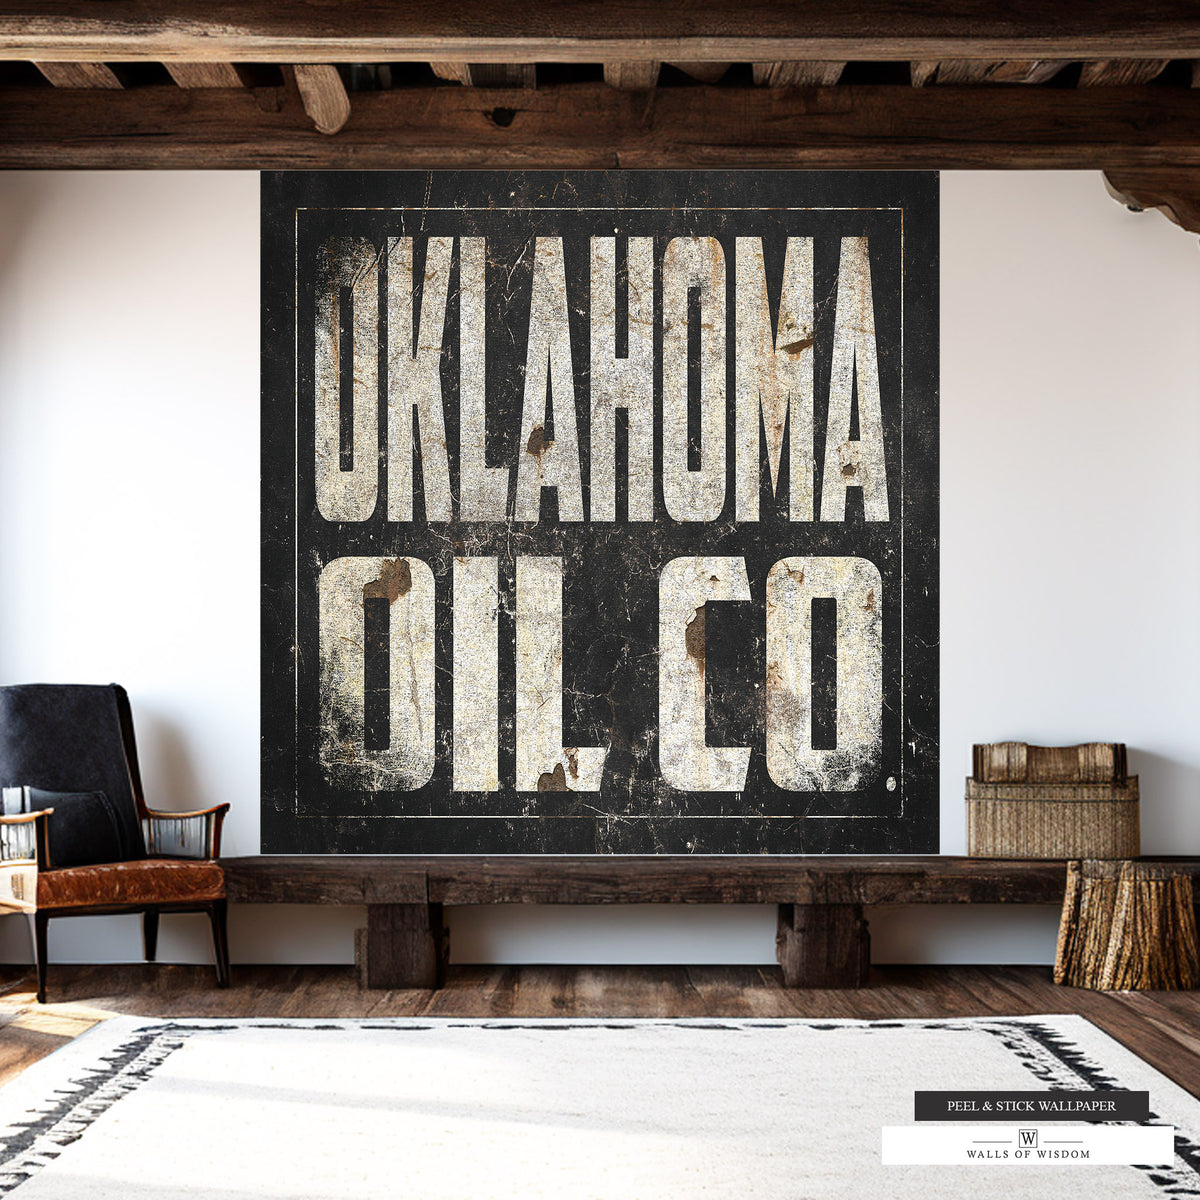 Vintage Oklahoma Oil Co wallpaper mural with distressed black metal background.